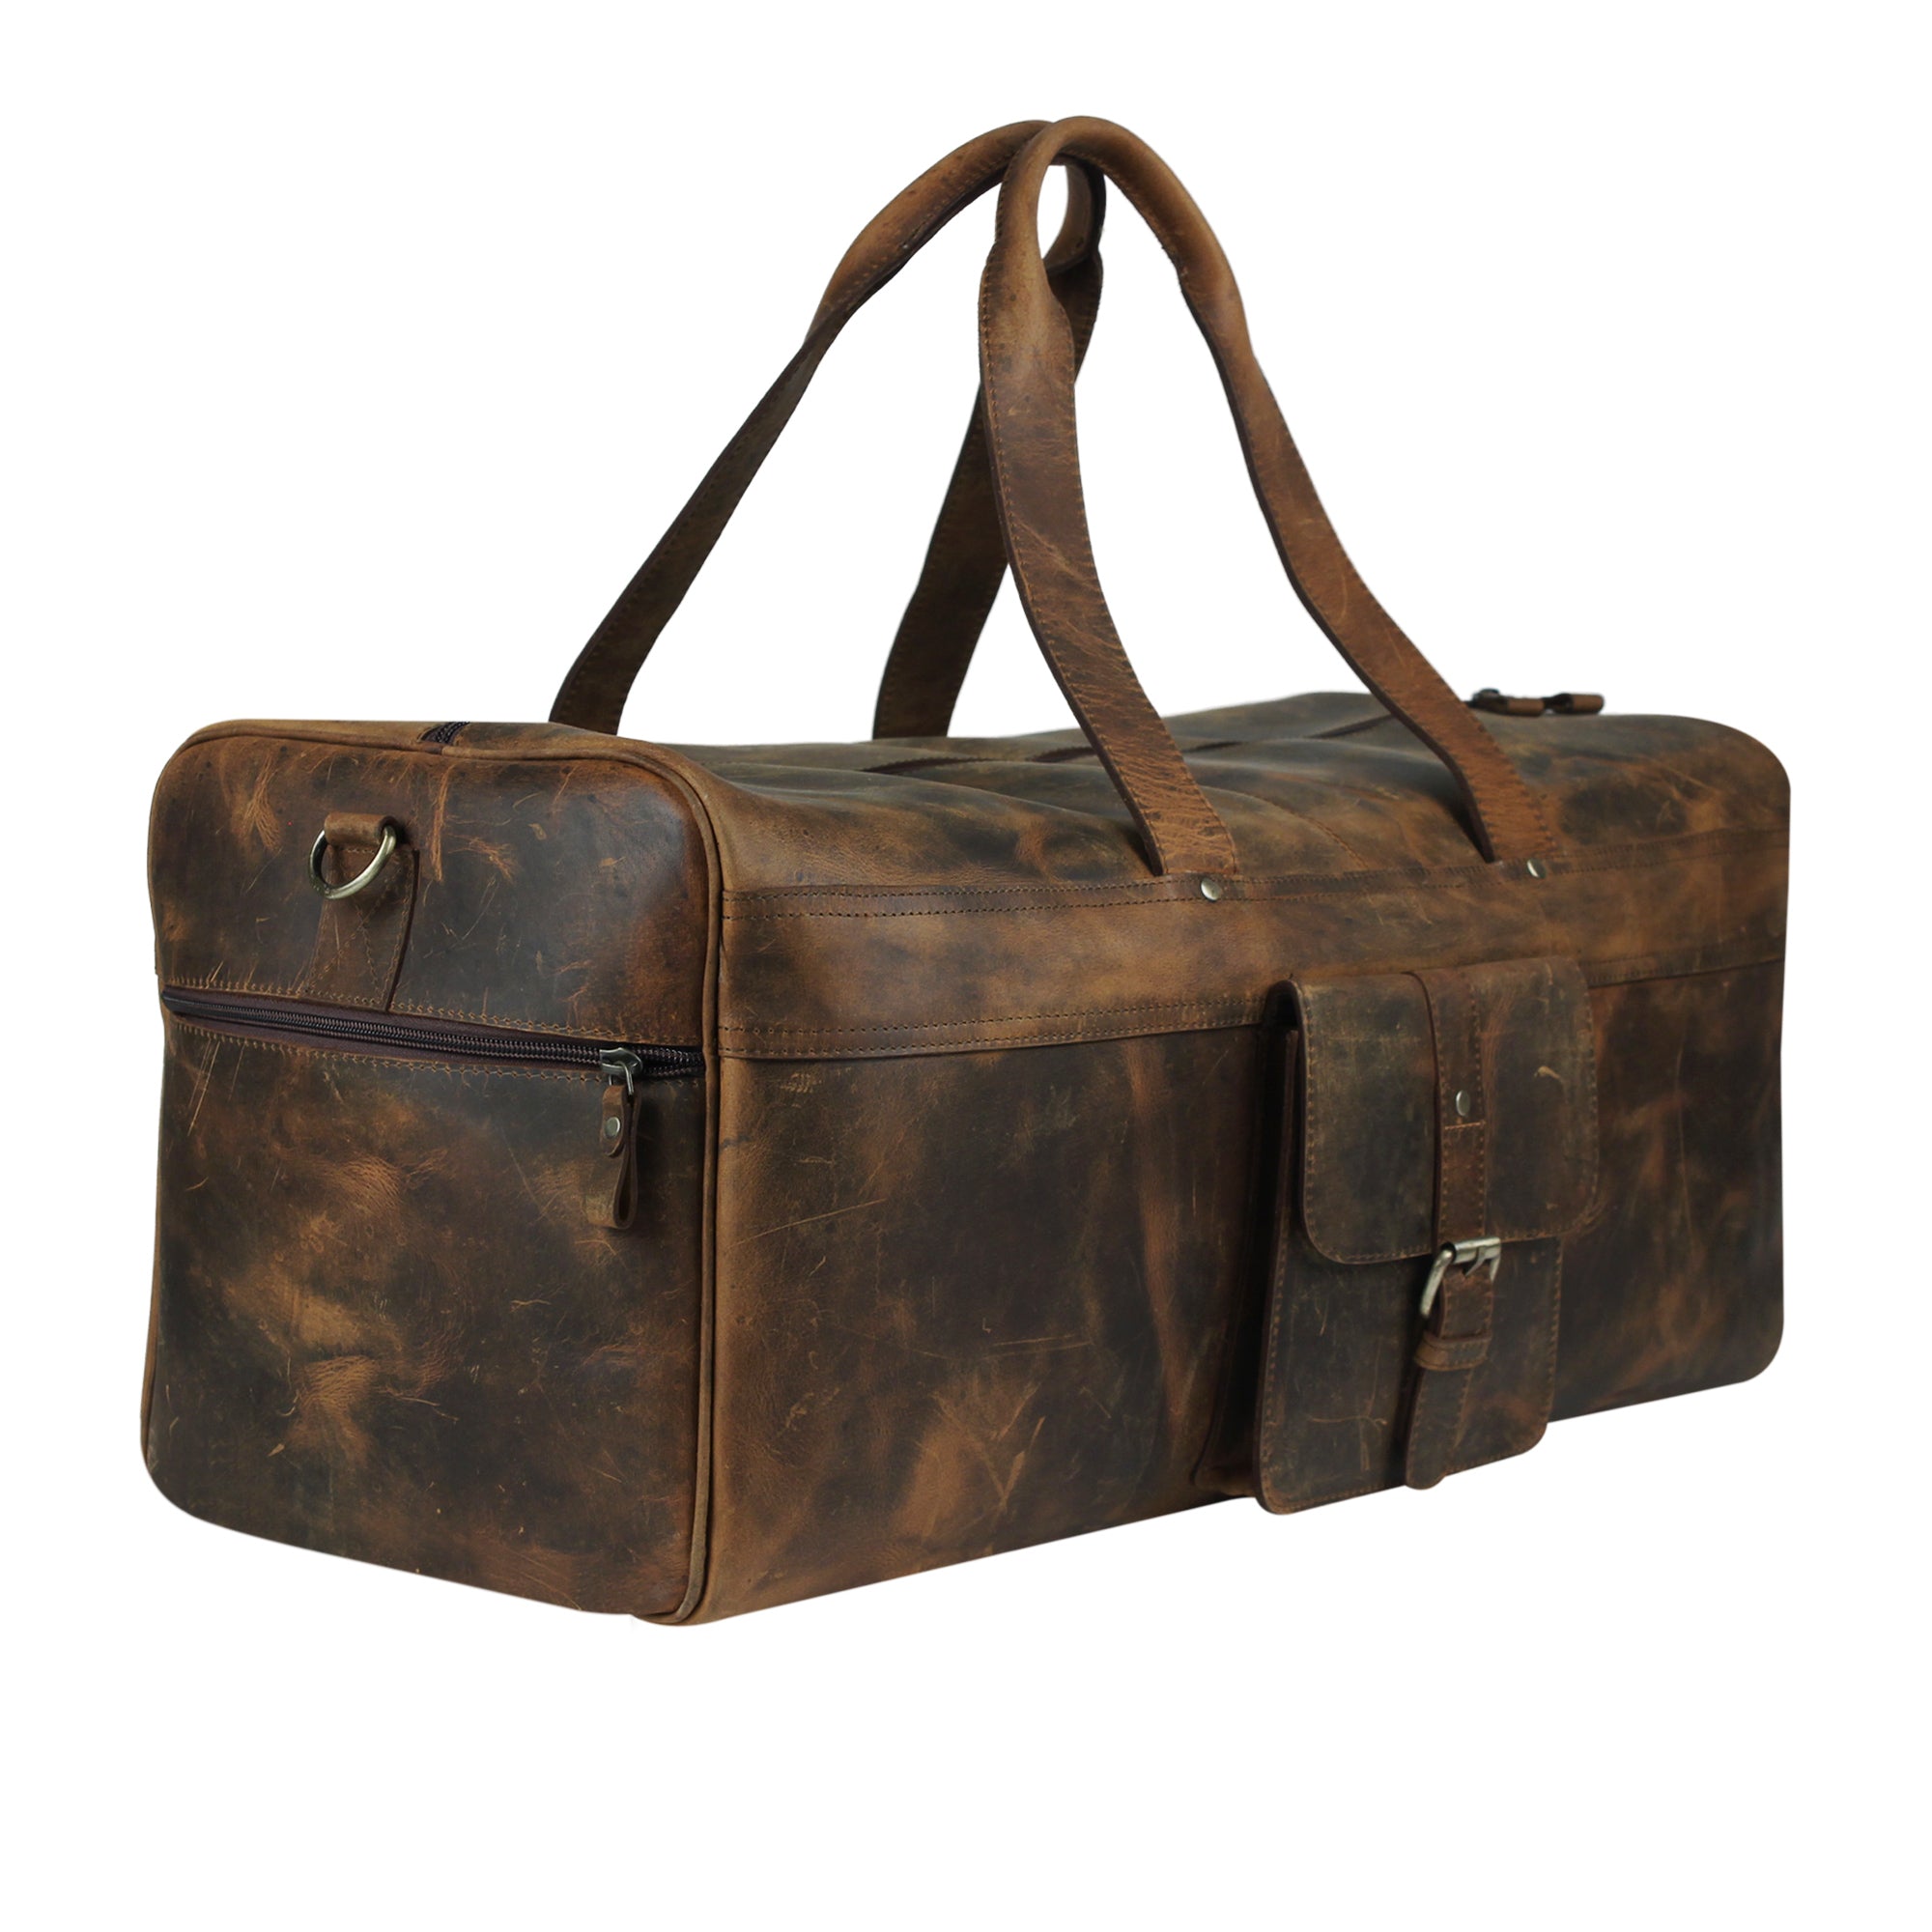 cool looking stylish leather duffle bag